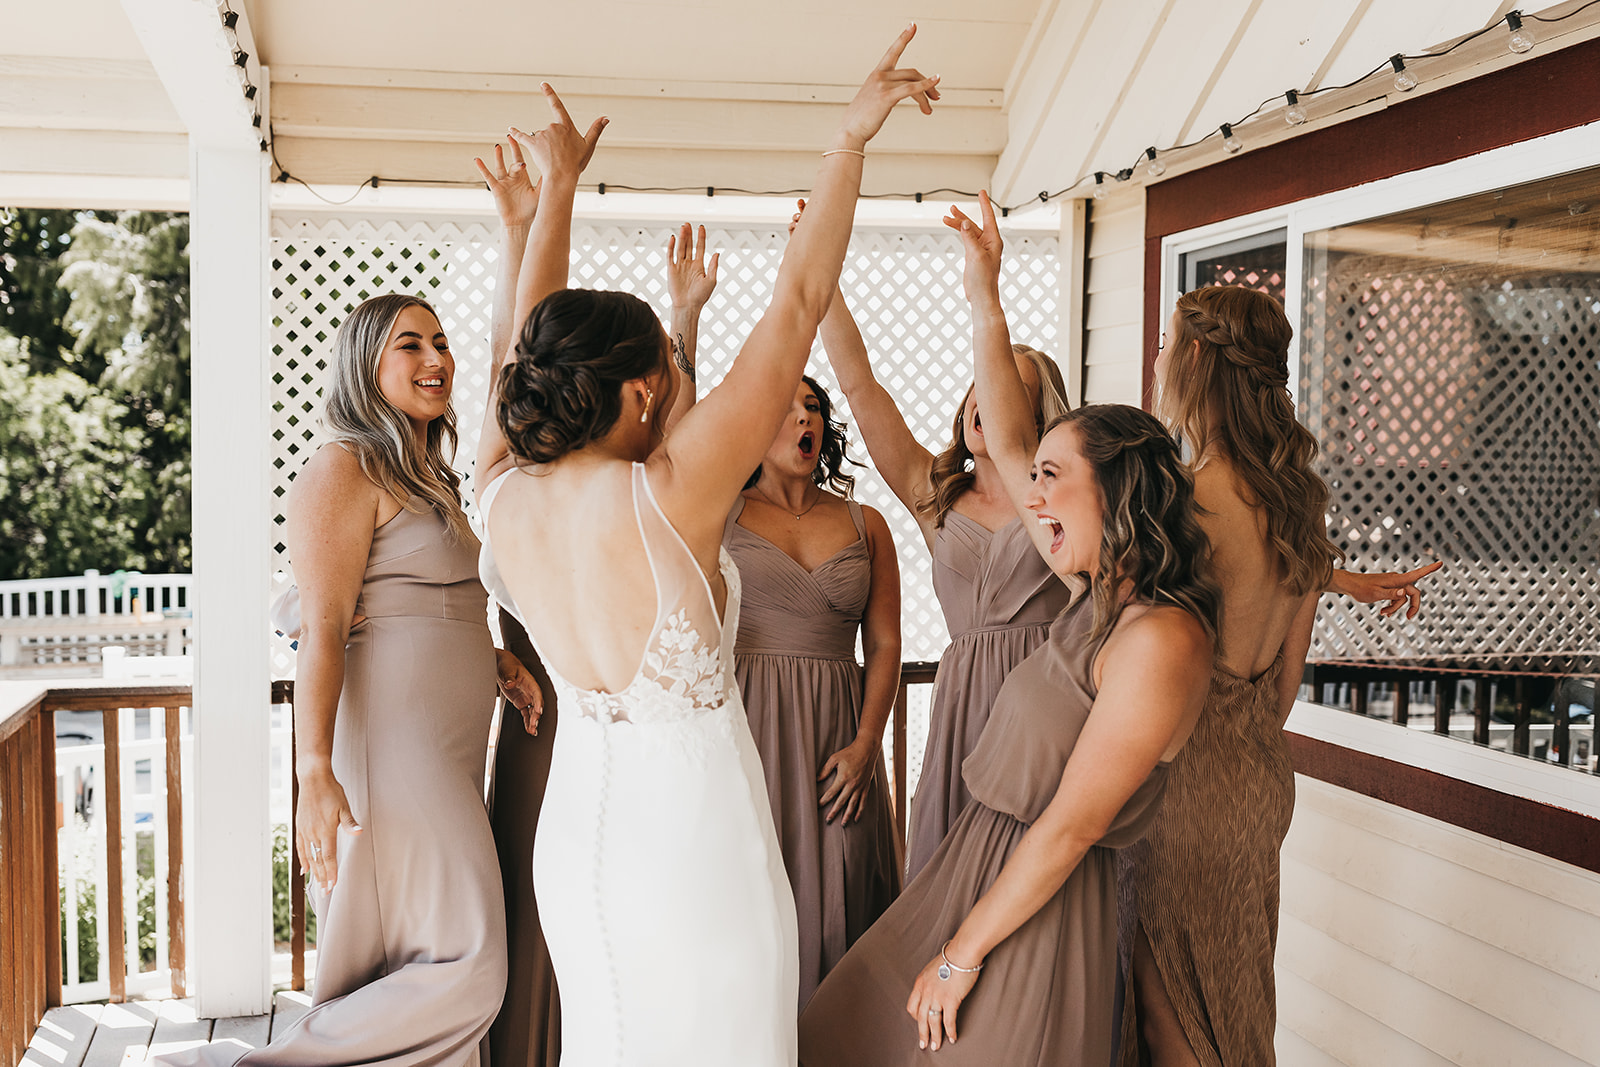 Bridesmaids getting excited and celebrating with the bride before the wedding ceremony at private lake house.